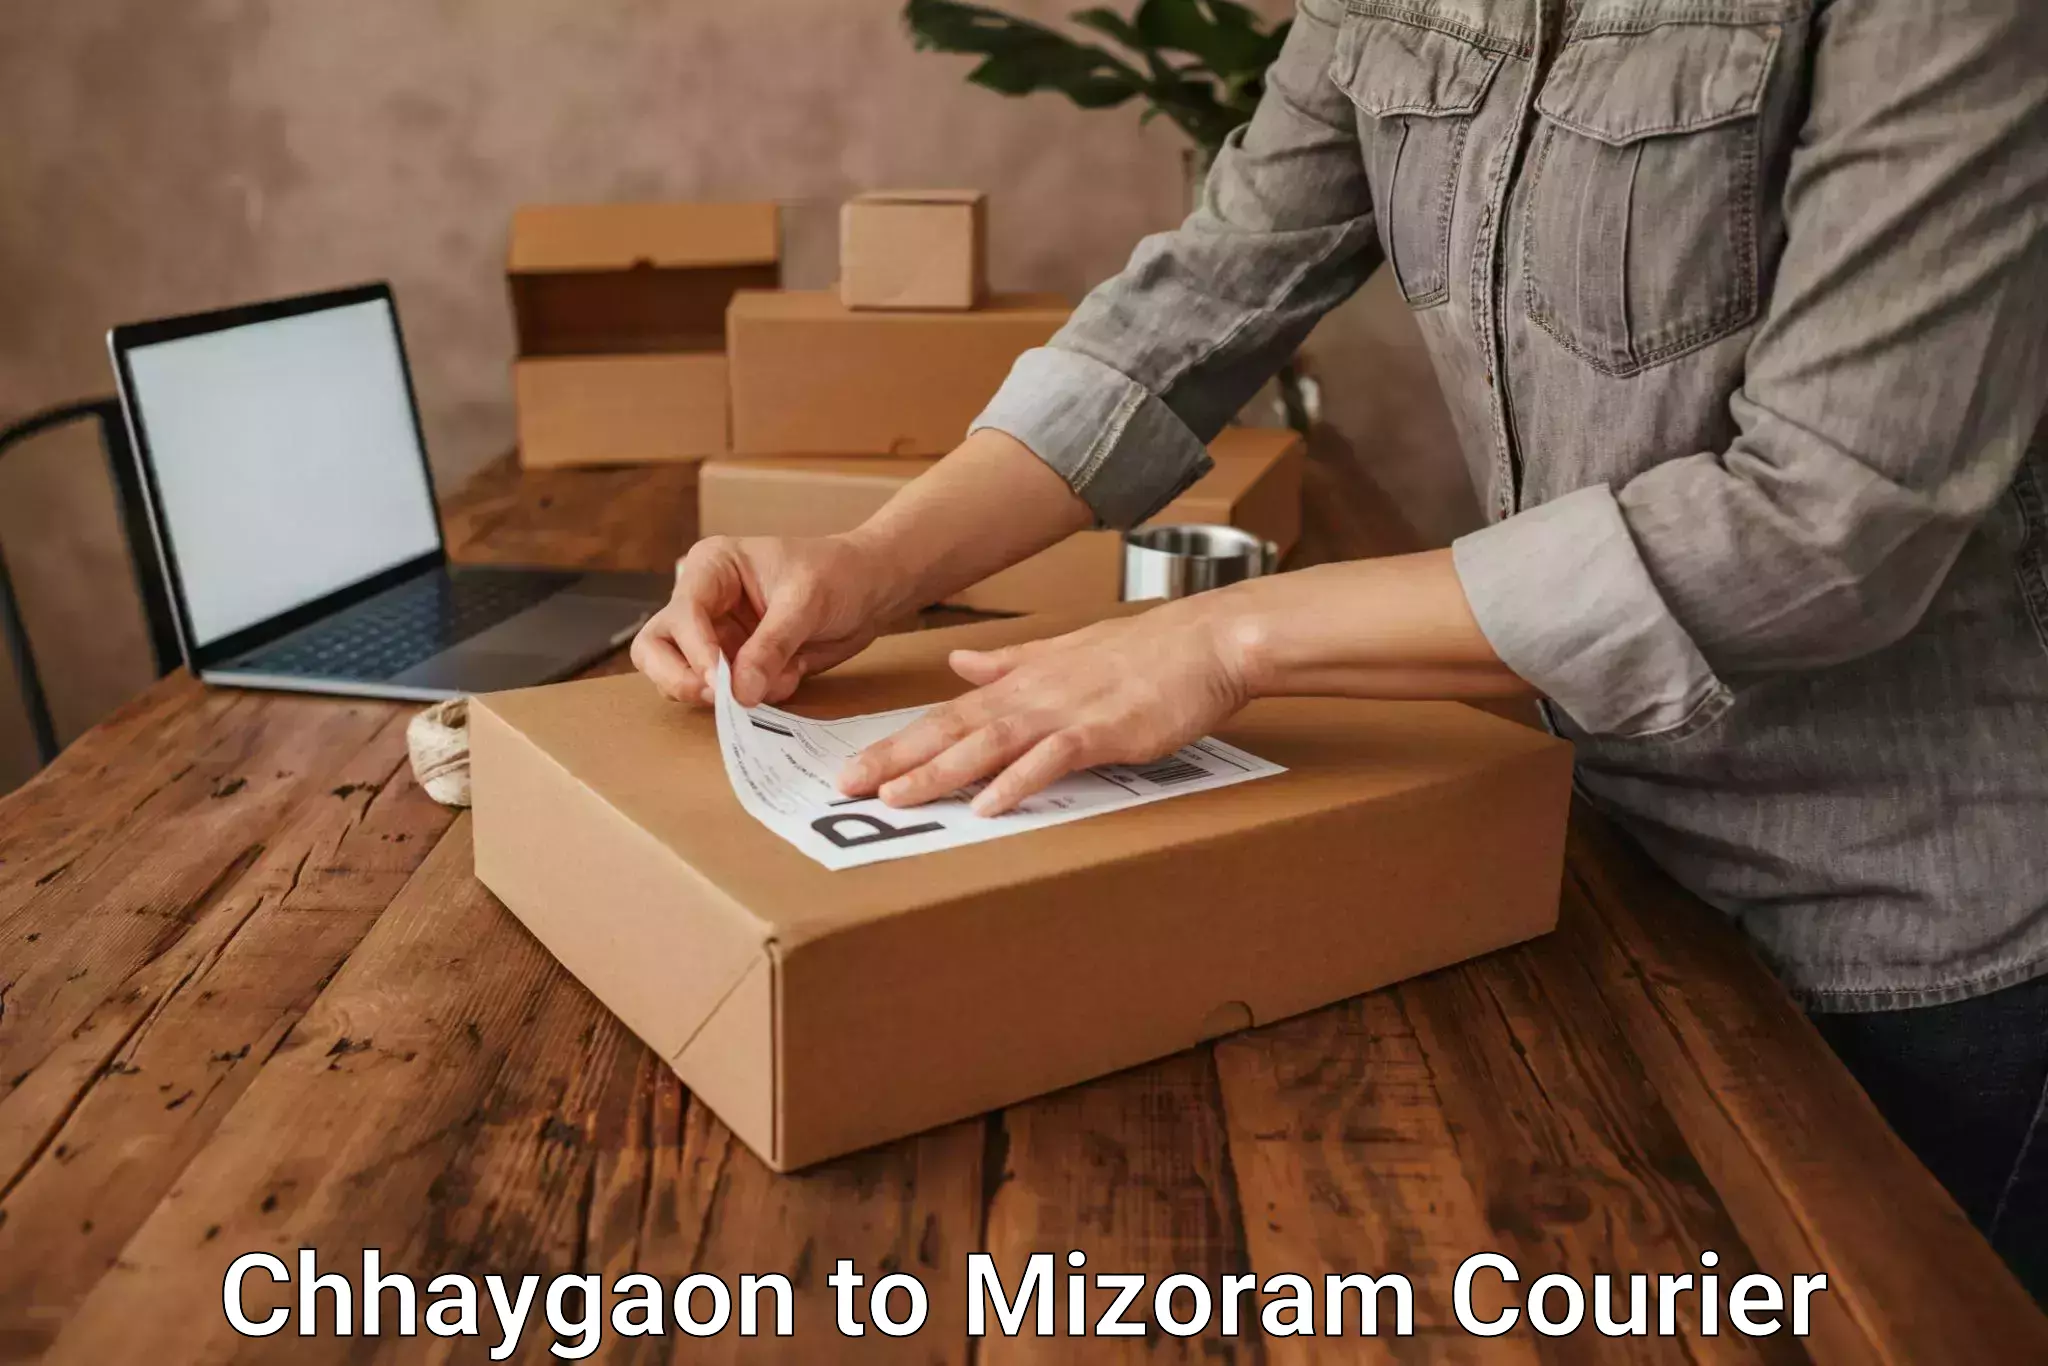 Courier service innovation Chhaygaon to Mizoram